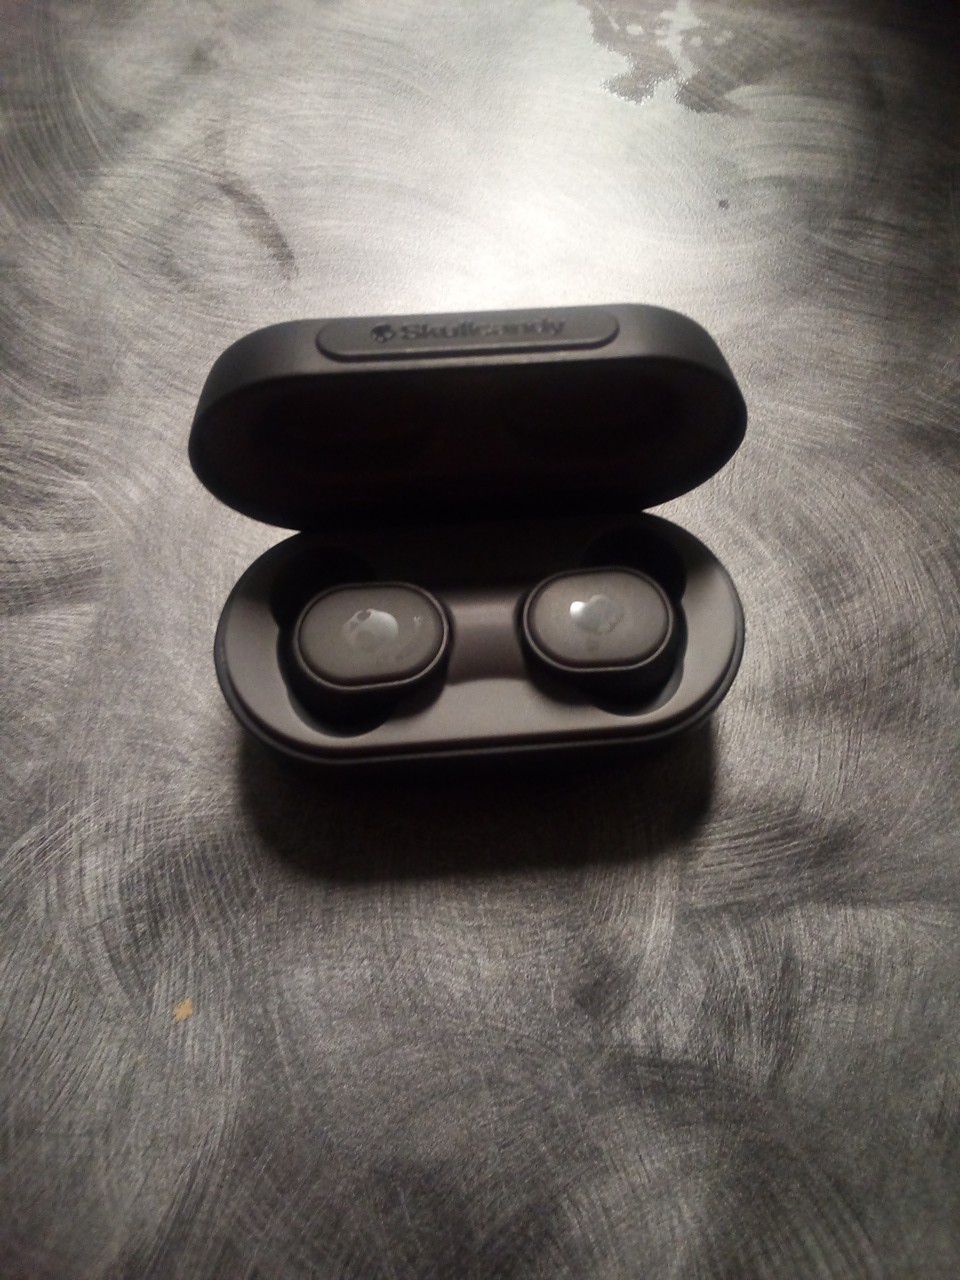 These are Skullcandy truly wireless earbuds